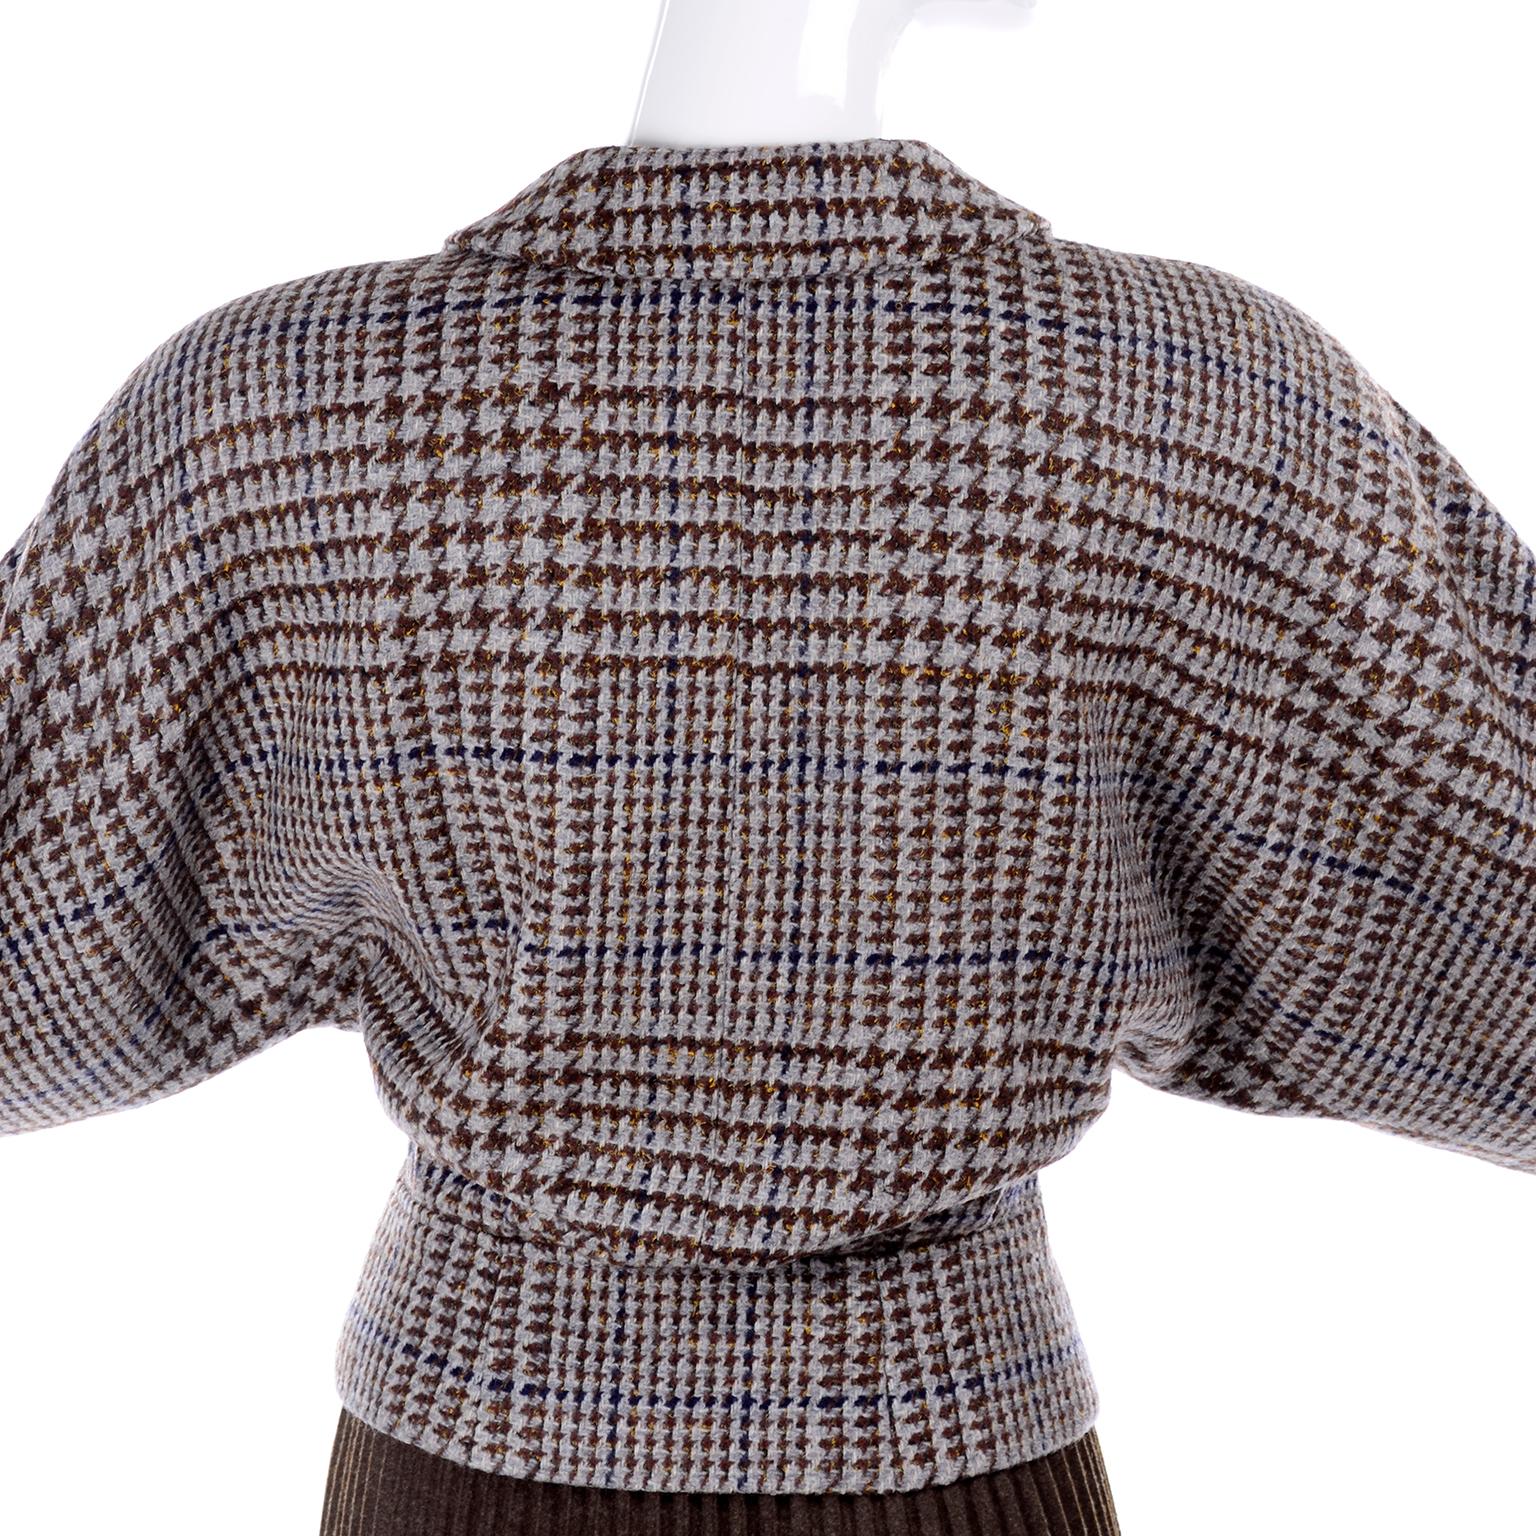 Women's Giorgio Armani 1980s Cropped Houndstooth Jacket W Pleated Brown Wool Skirt Suit